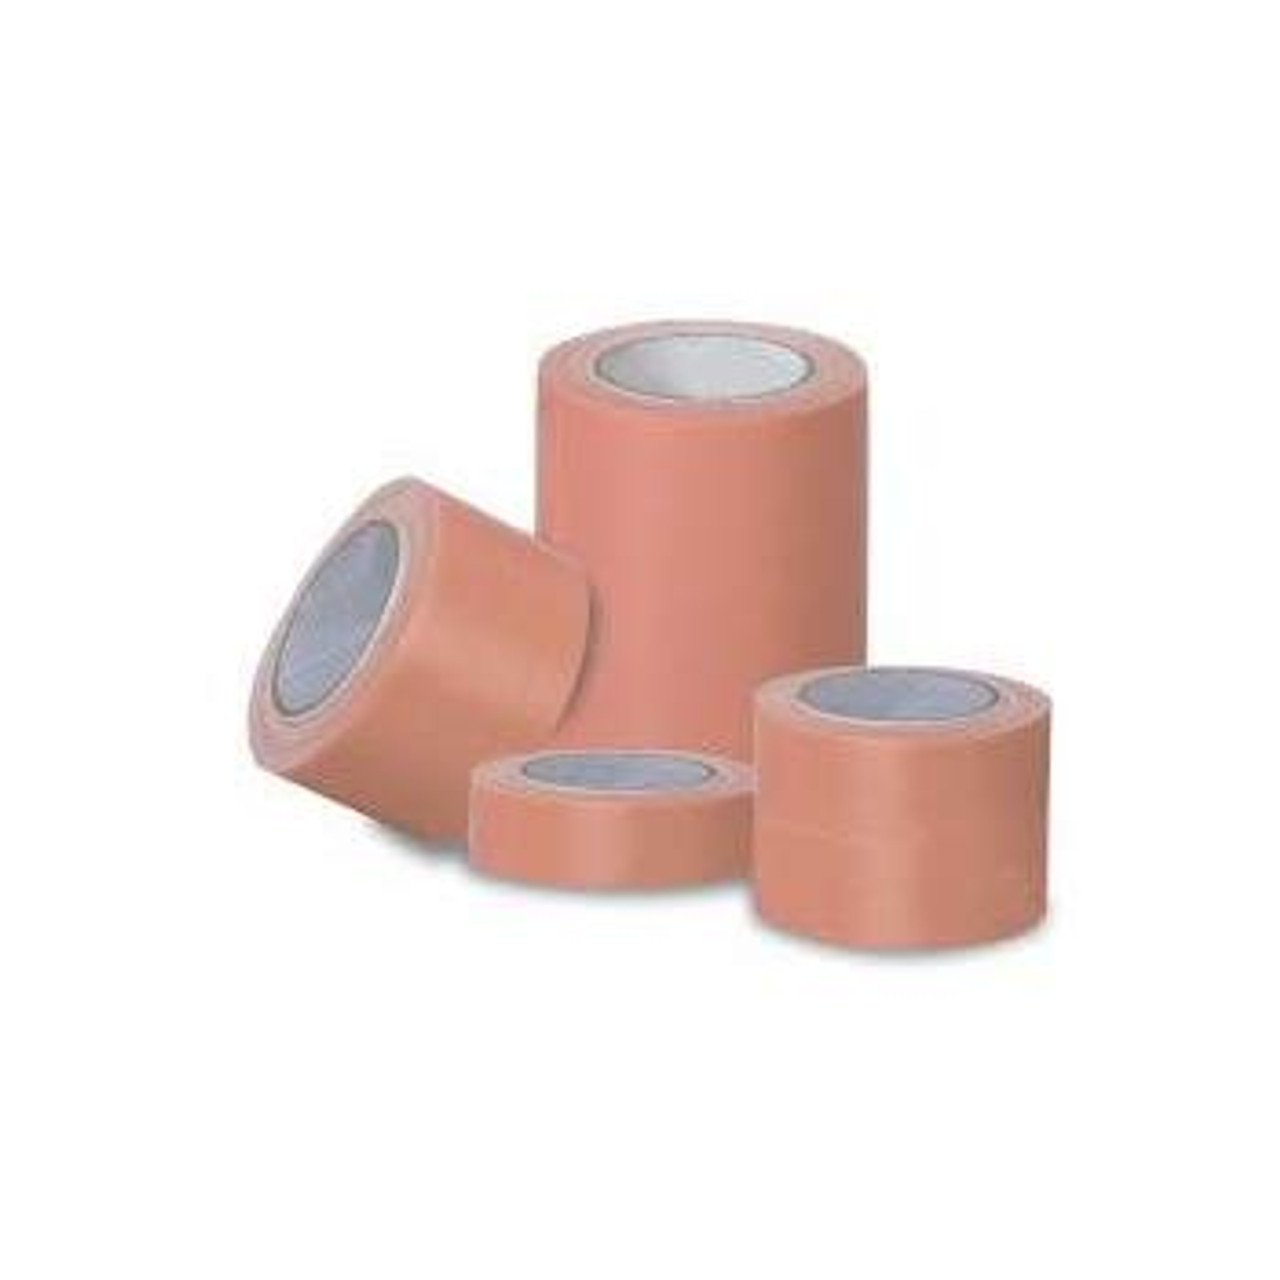 Amico 20LF TAPE ADHESIVE HOSPITAL HY-TAPE PLASTIC 2in x 5 yd BX/6